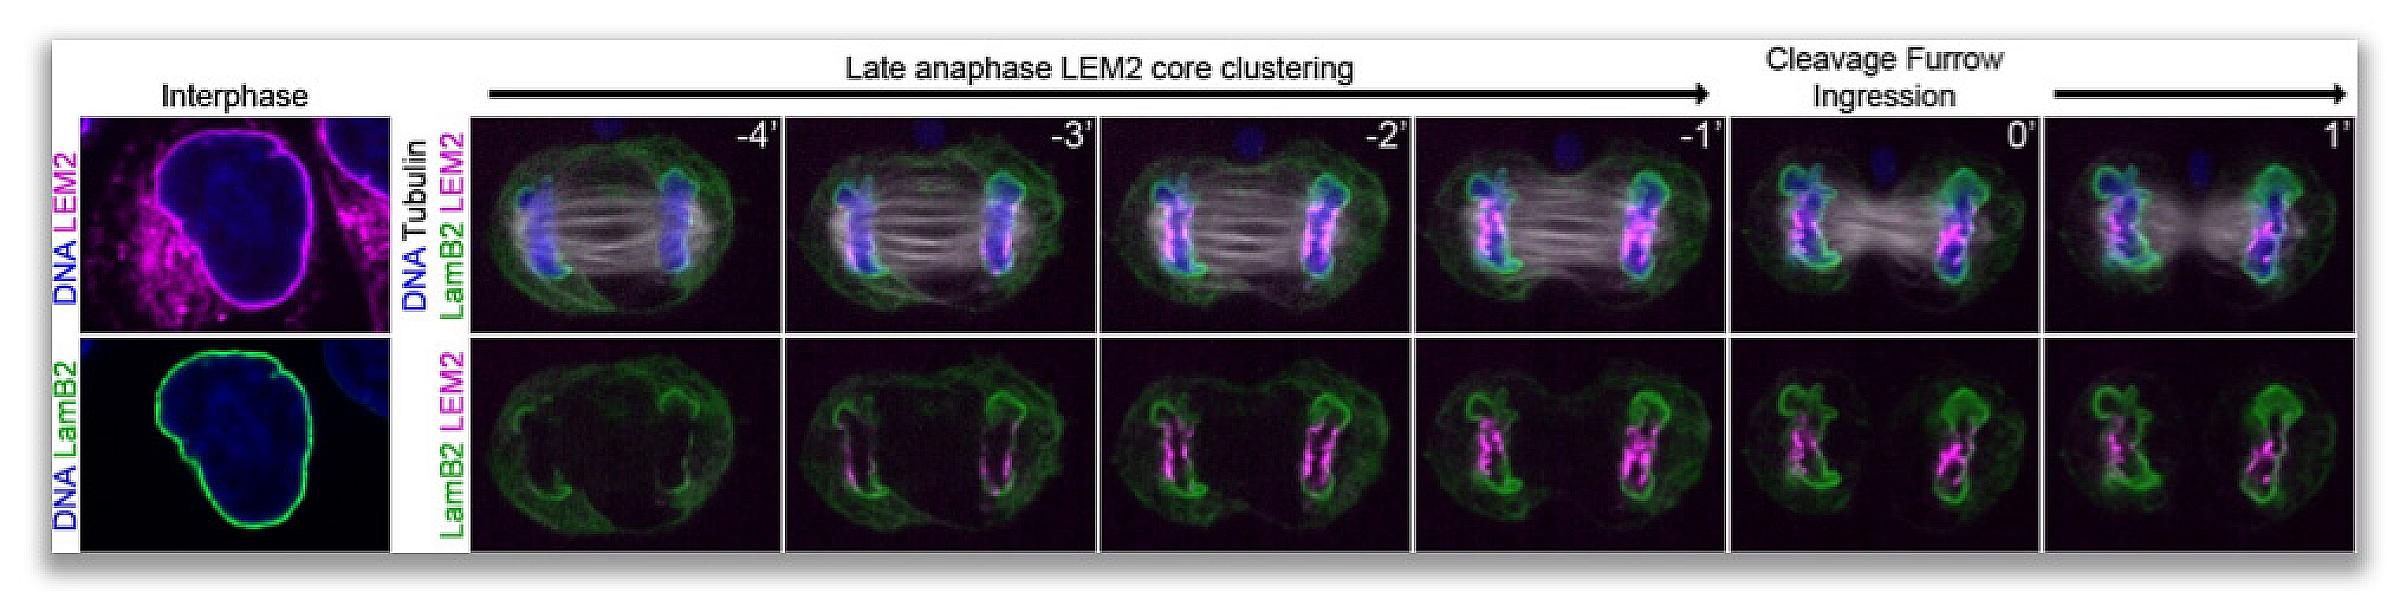 Series of images showing how LEM2 works with ESCRT factor CHMP7 to seal the nuclear envelope